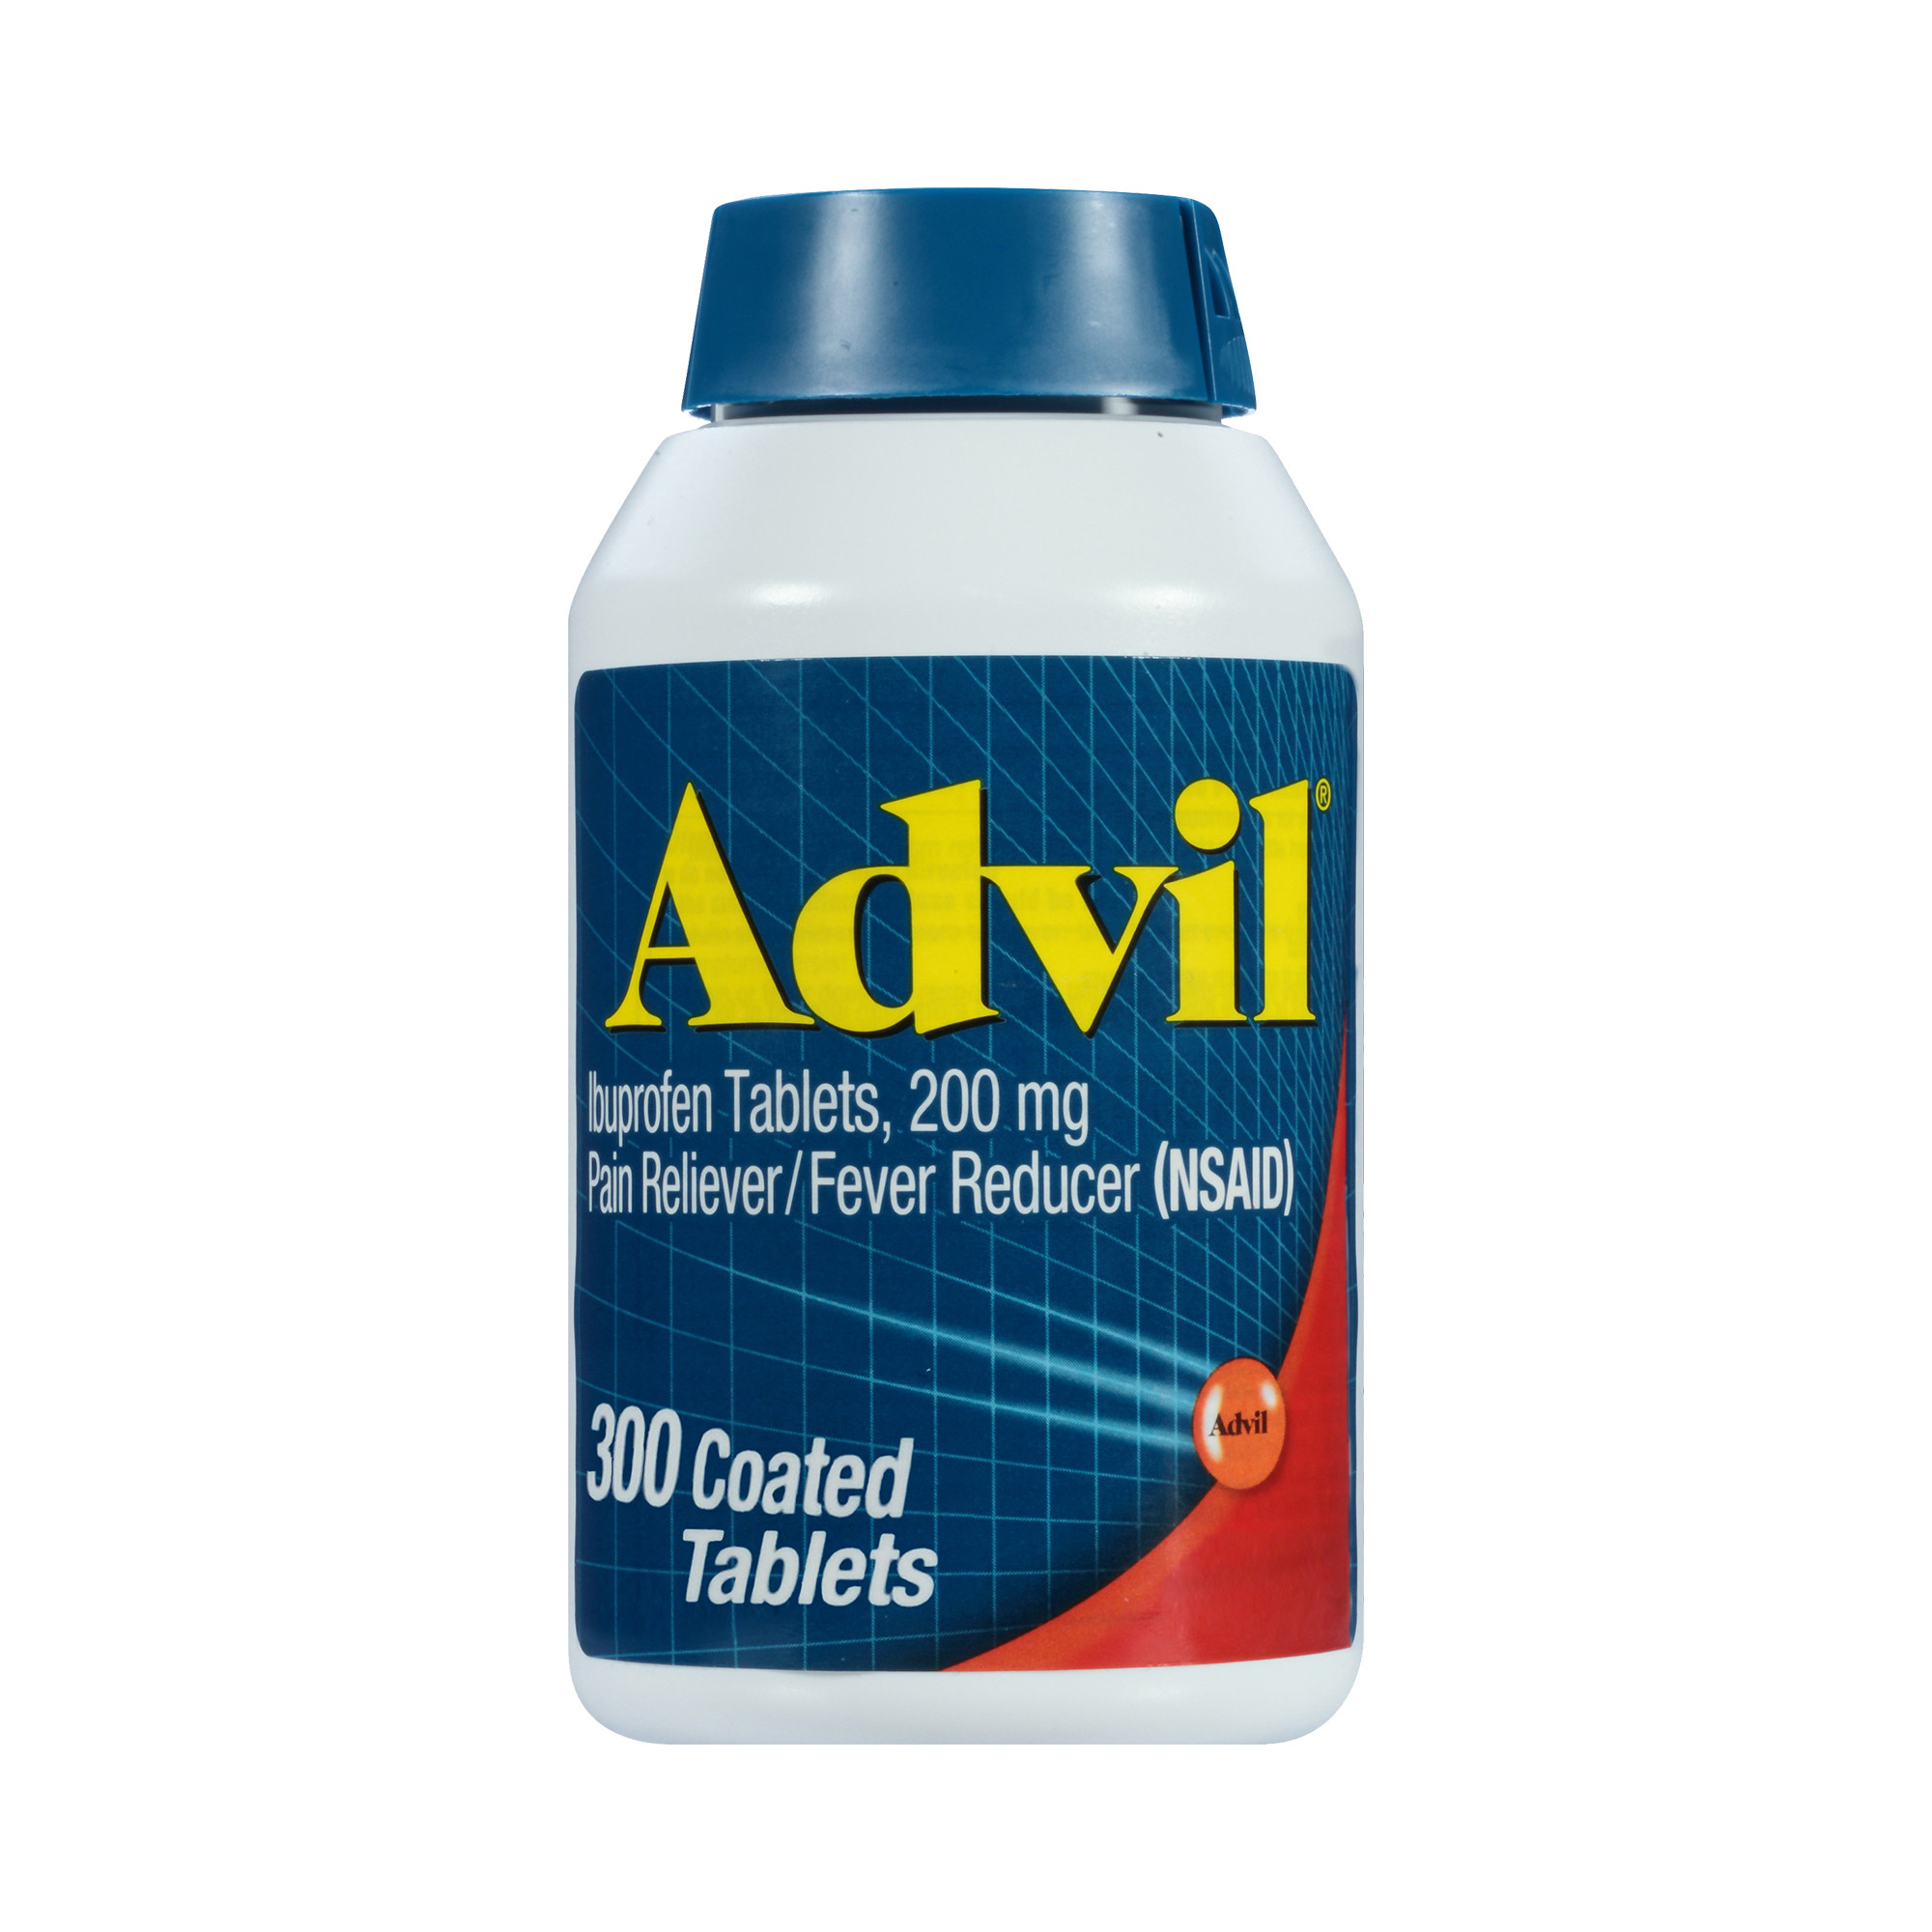 Advil Pain Relievers and Fever Reducer Coated Tablets, 200Mg Ibuprofen, 300 Count - image 1 of 7